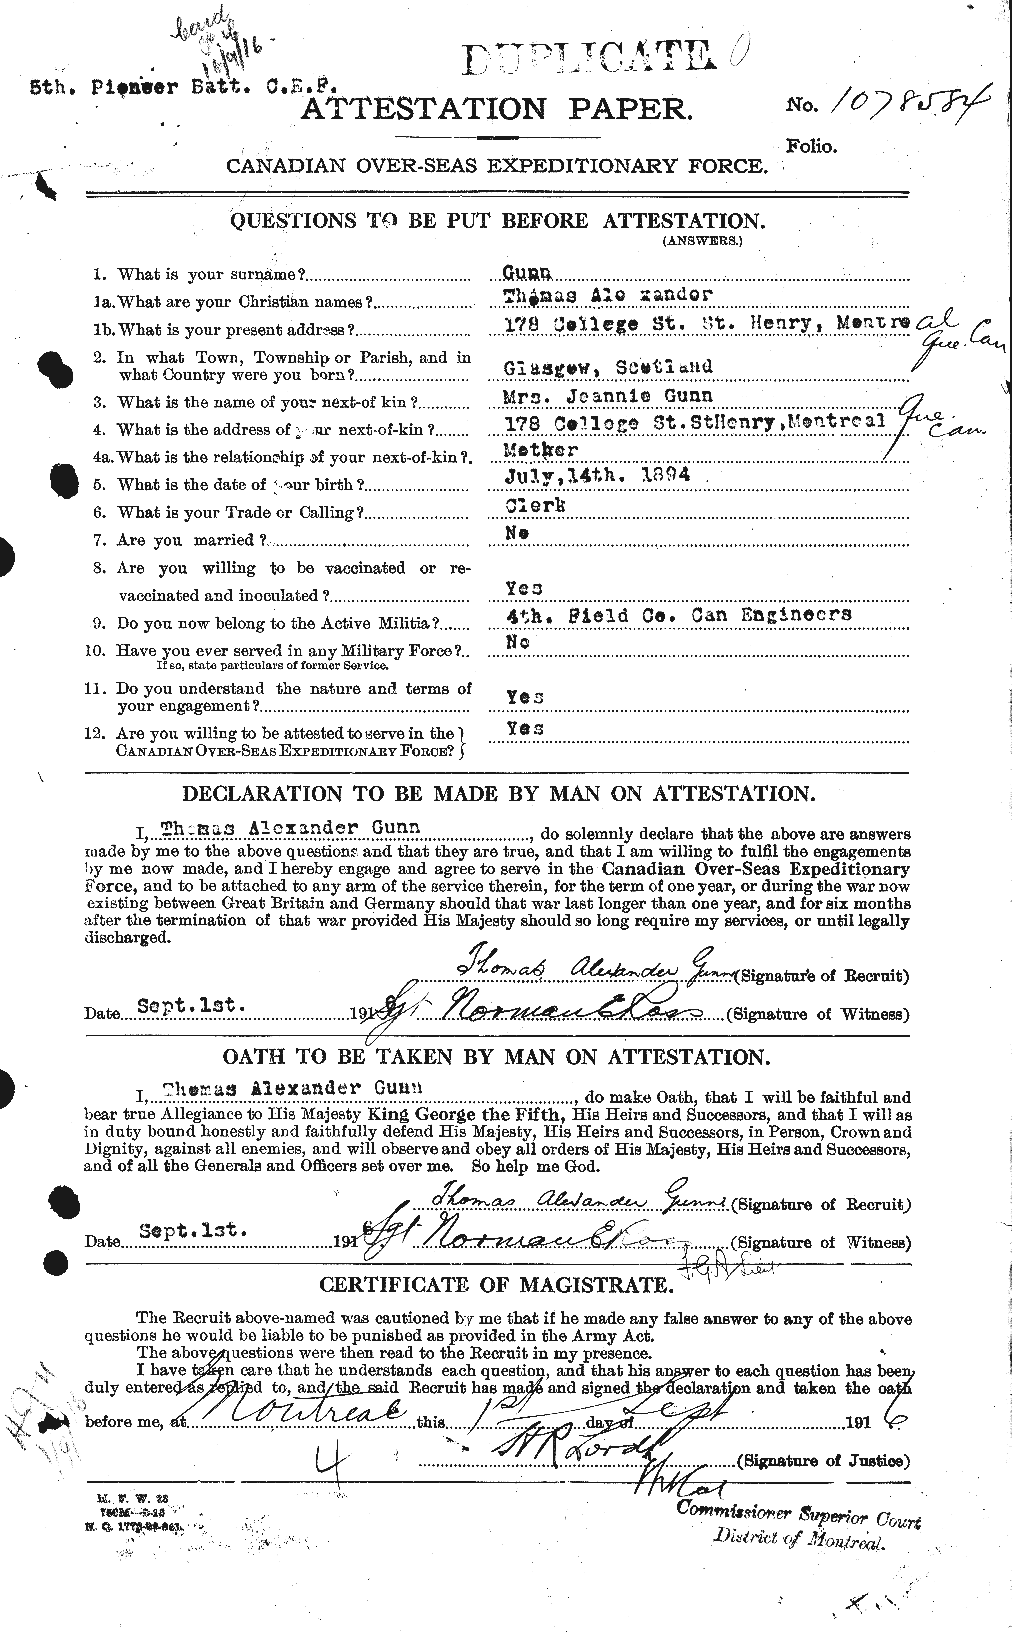 Personnel Records of the First World War - CEF 369338a